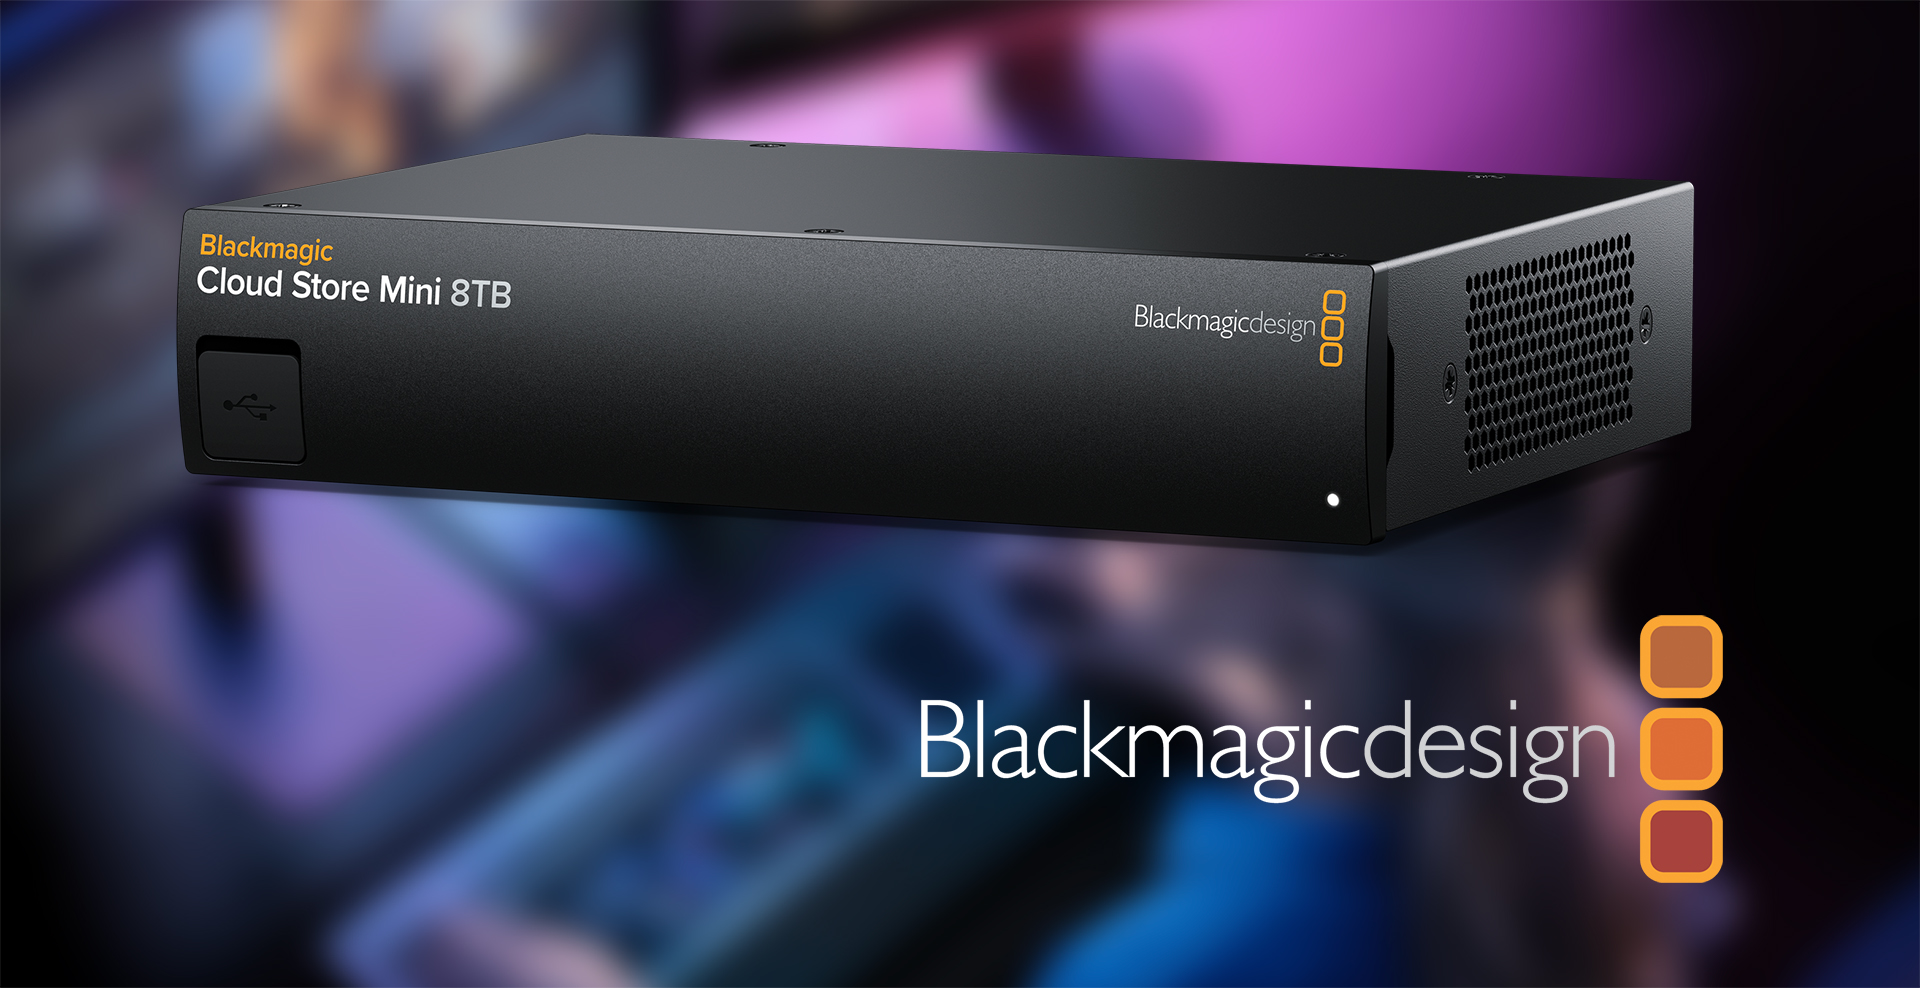 Review: A look at the Blackmagic Cloud Store Mini 52